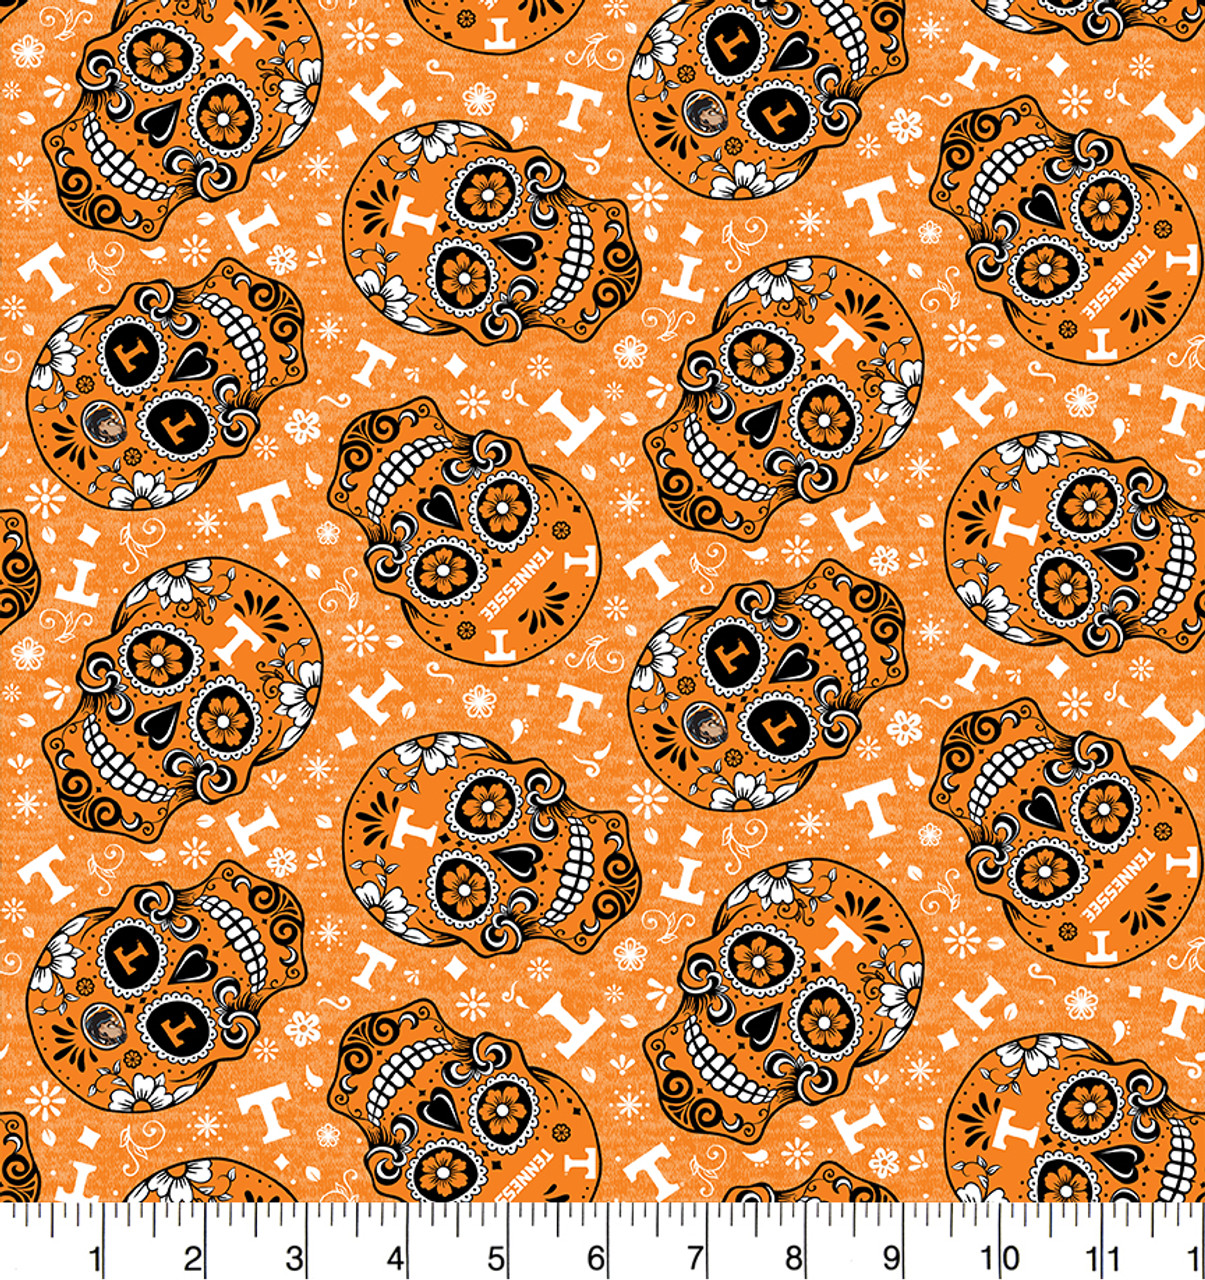 University of Tennessee Volunteers Cotton Fabric with Sugar Skull Print or Matching Solid Cotton Fabrics